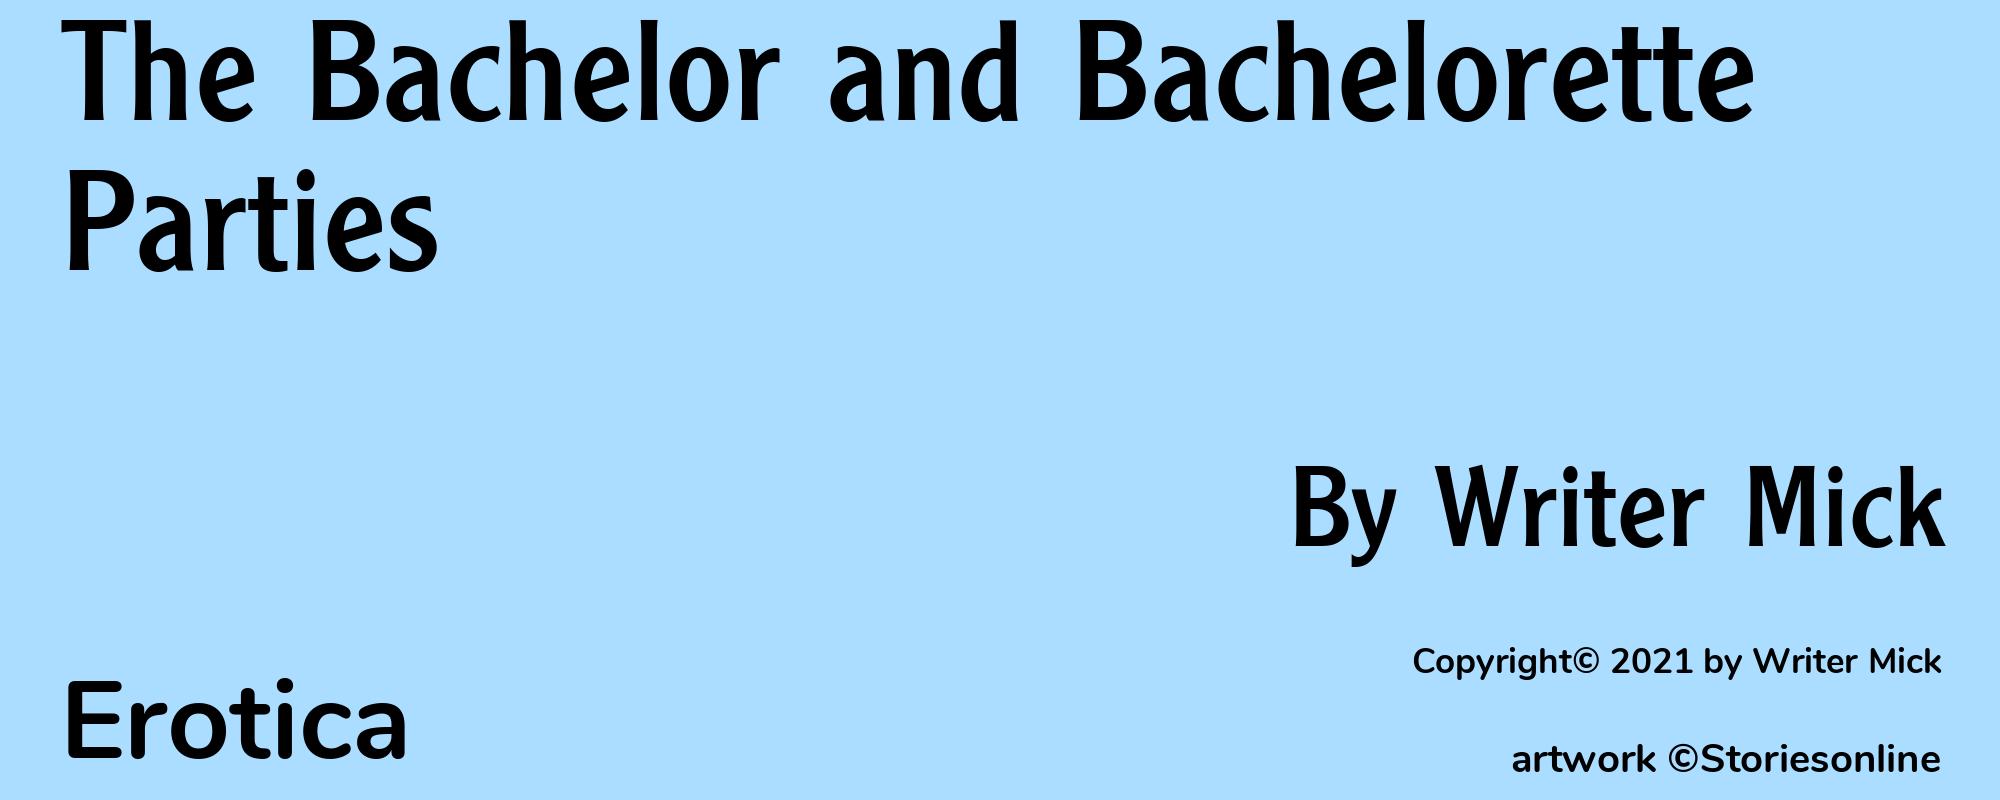 The Bachelor and Bachelorette Parties - Cover